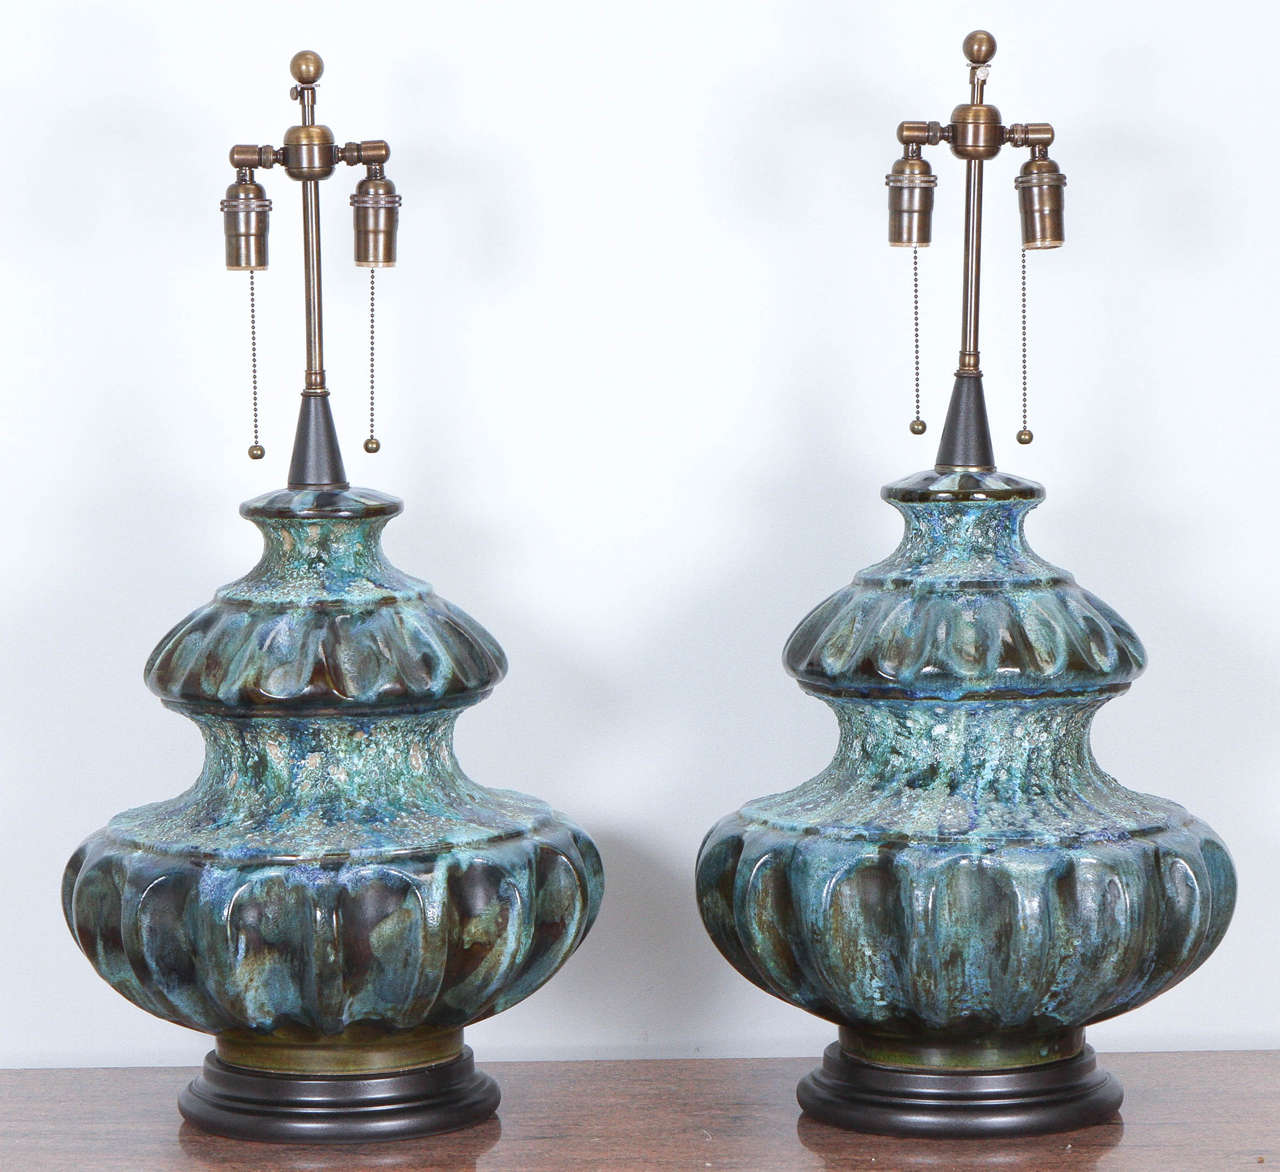 Spectacular pair of large ceramic lamps with a beautiful multicolored volcanic glaze. They lamps are newly rewired with antique bronze double clusters.